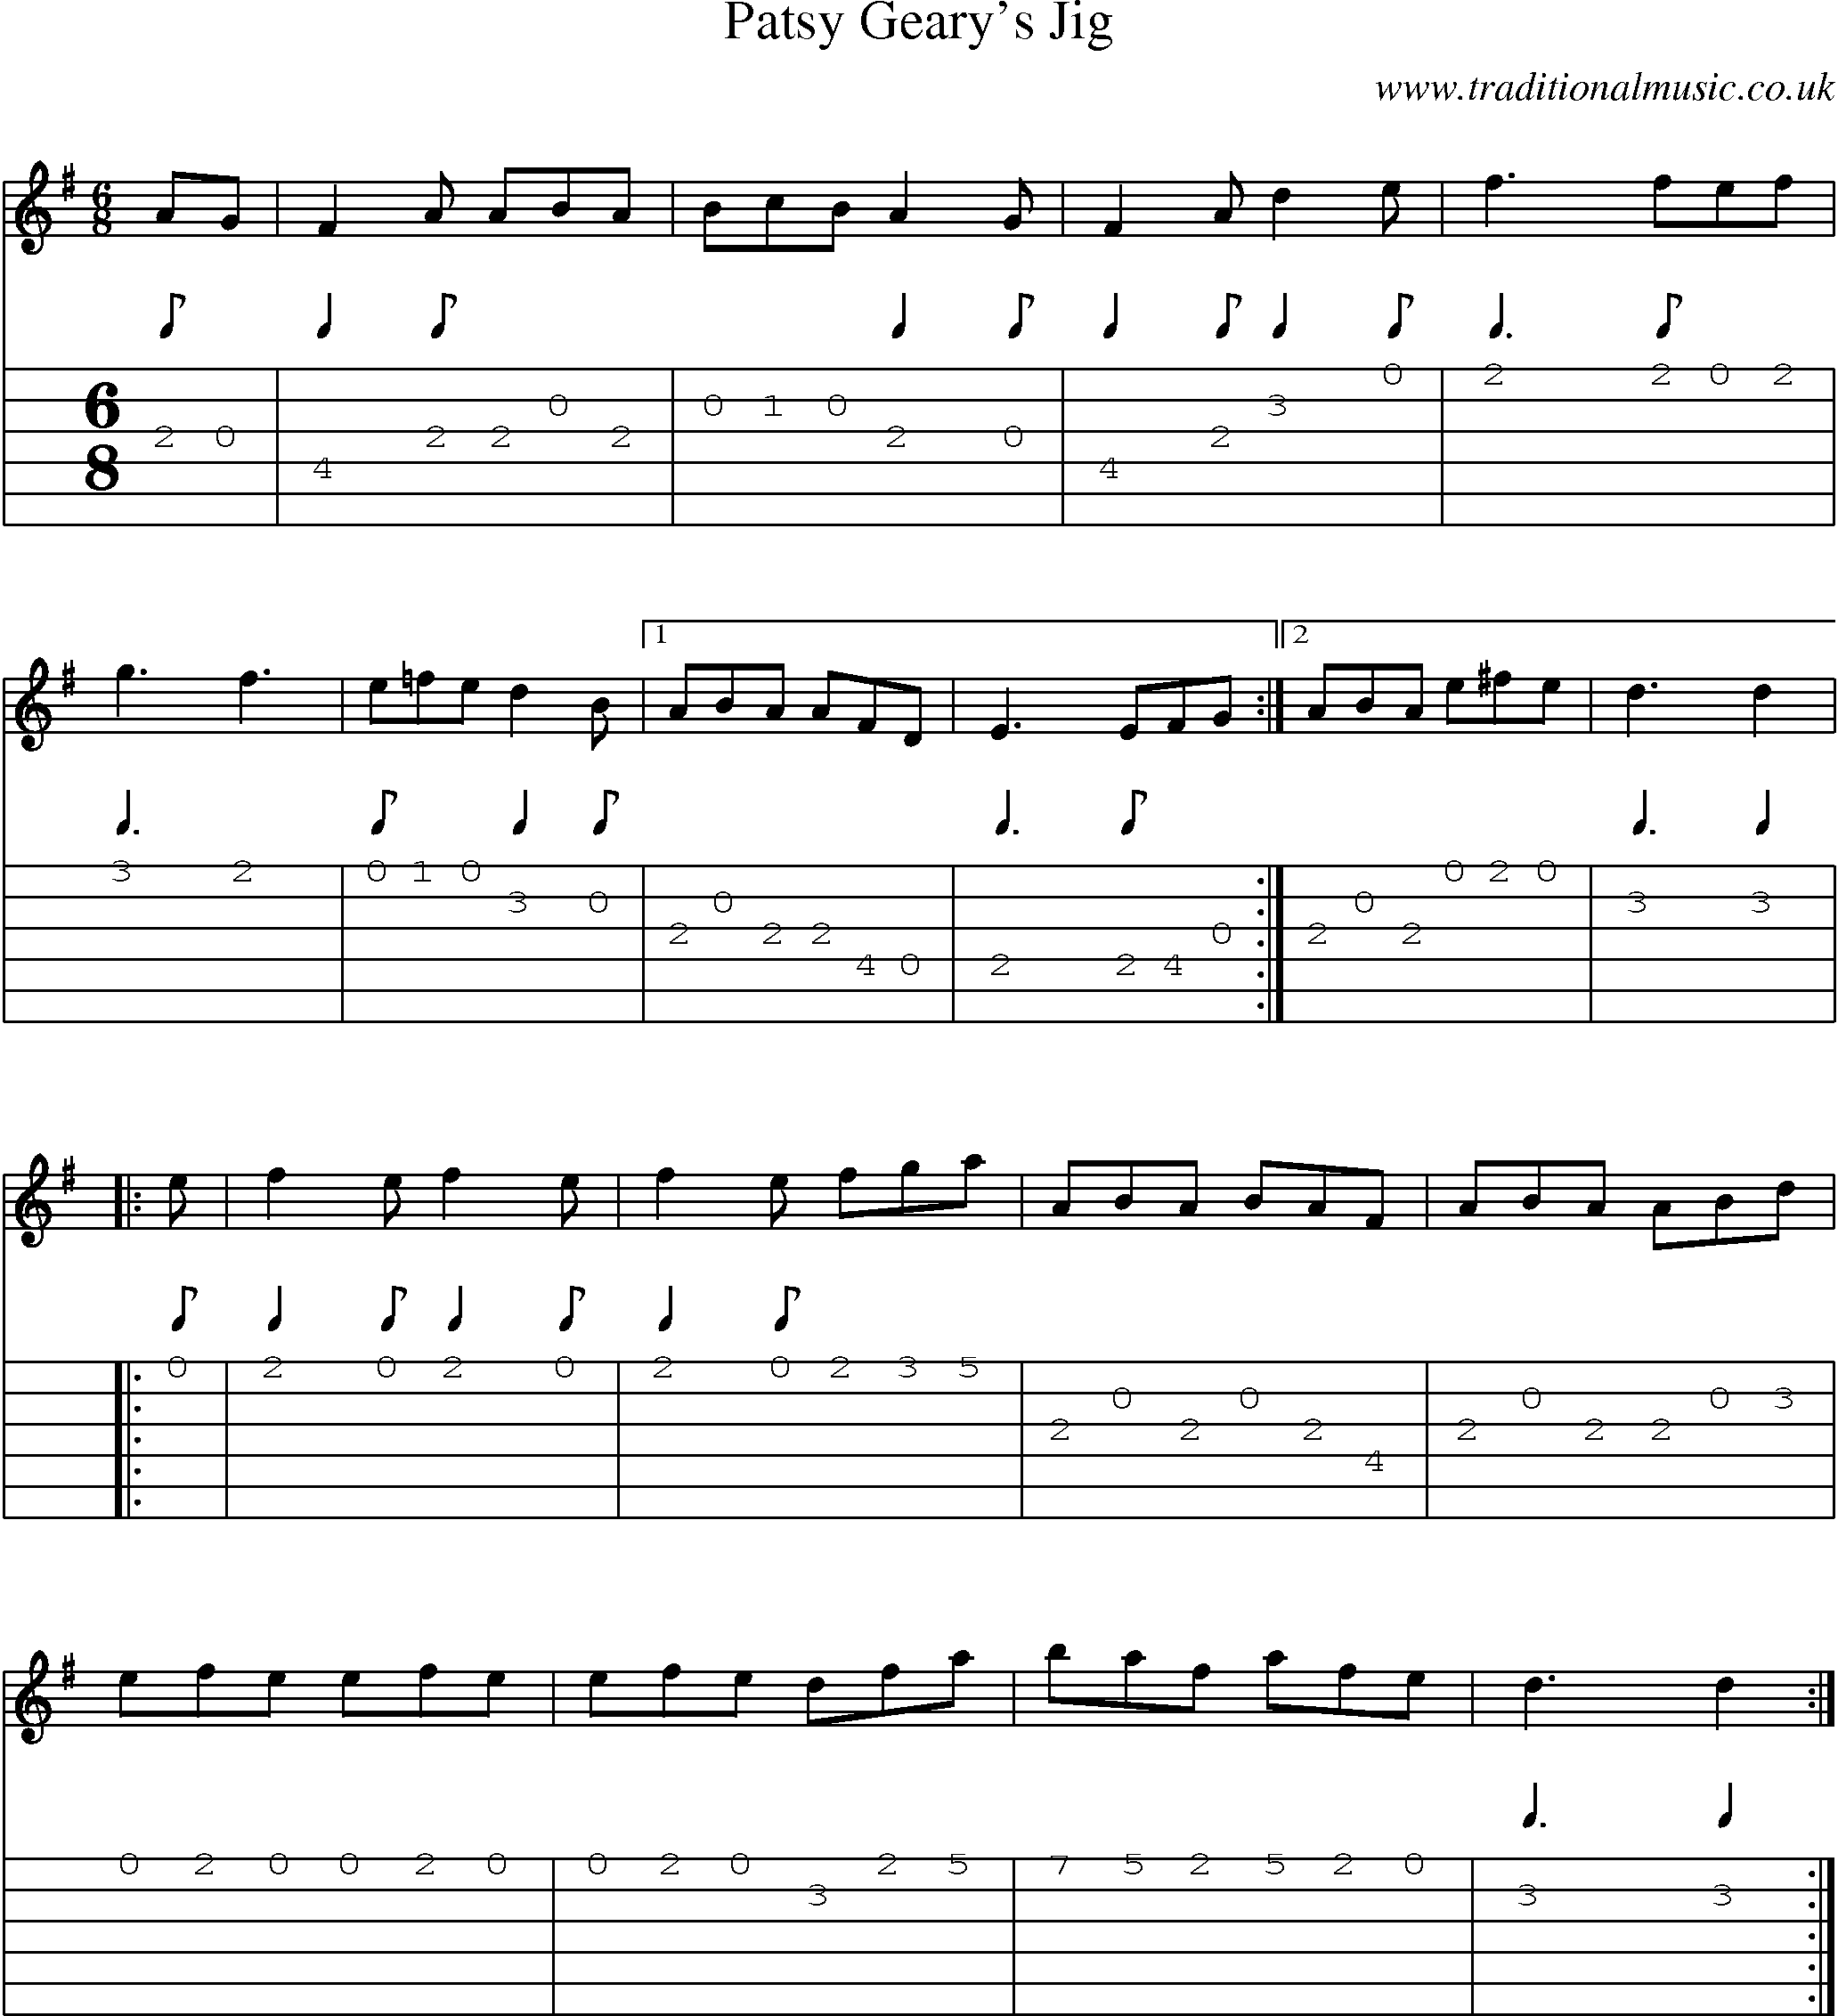 Music Score and Guitar Tabs for Patsy Gearys Jig